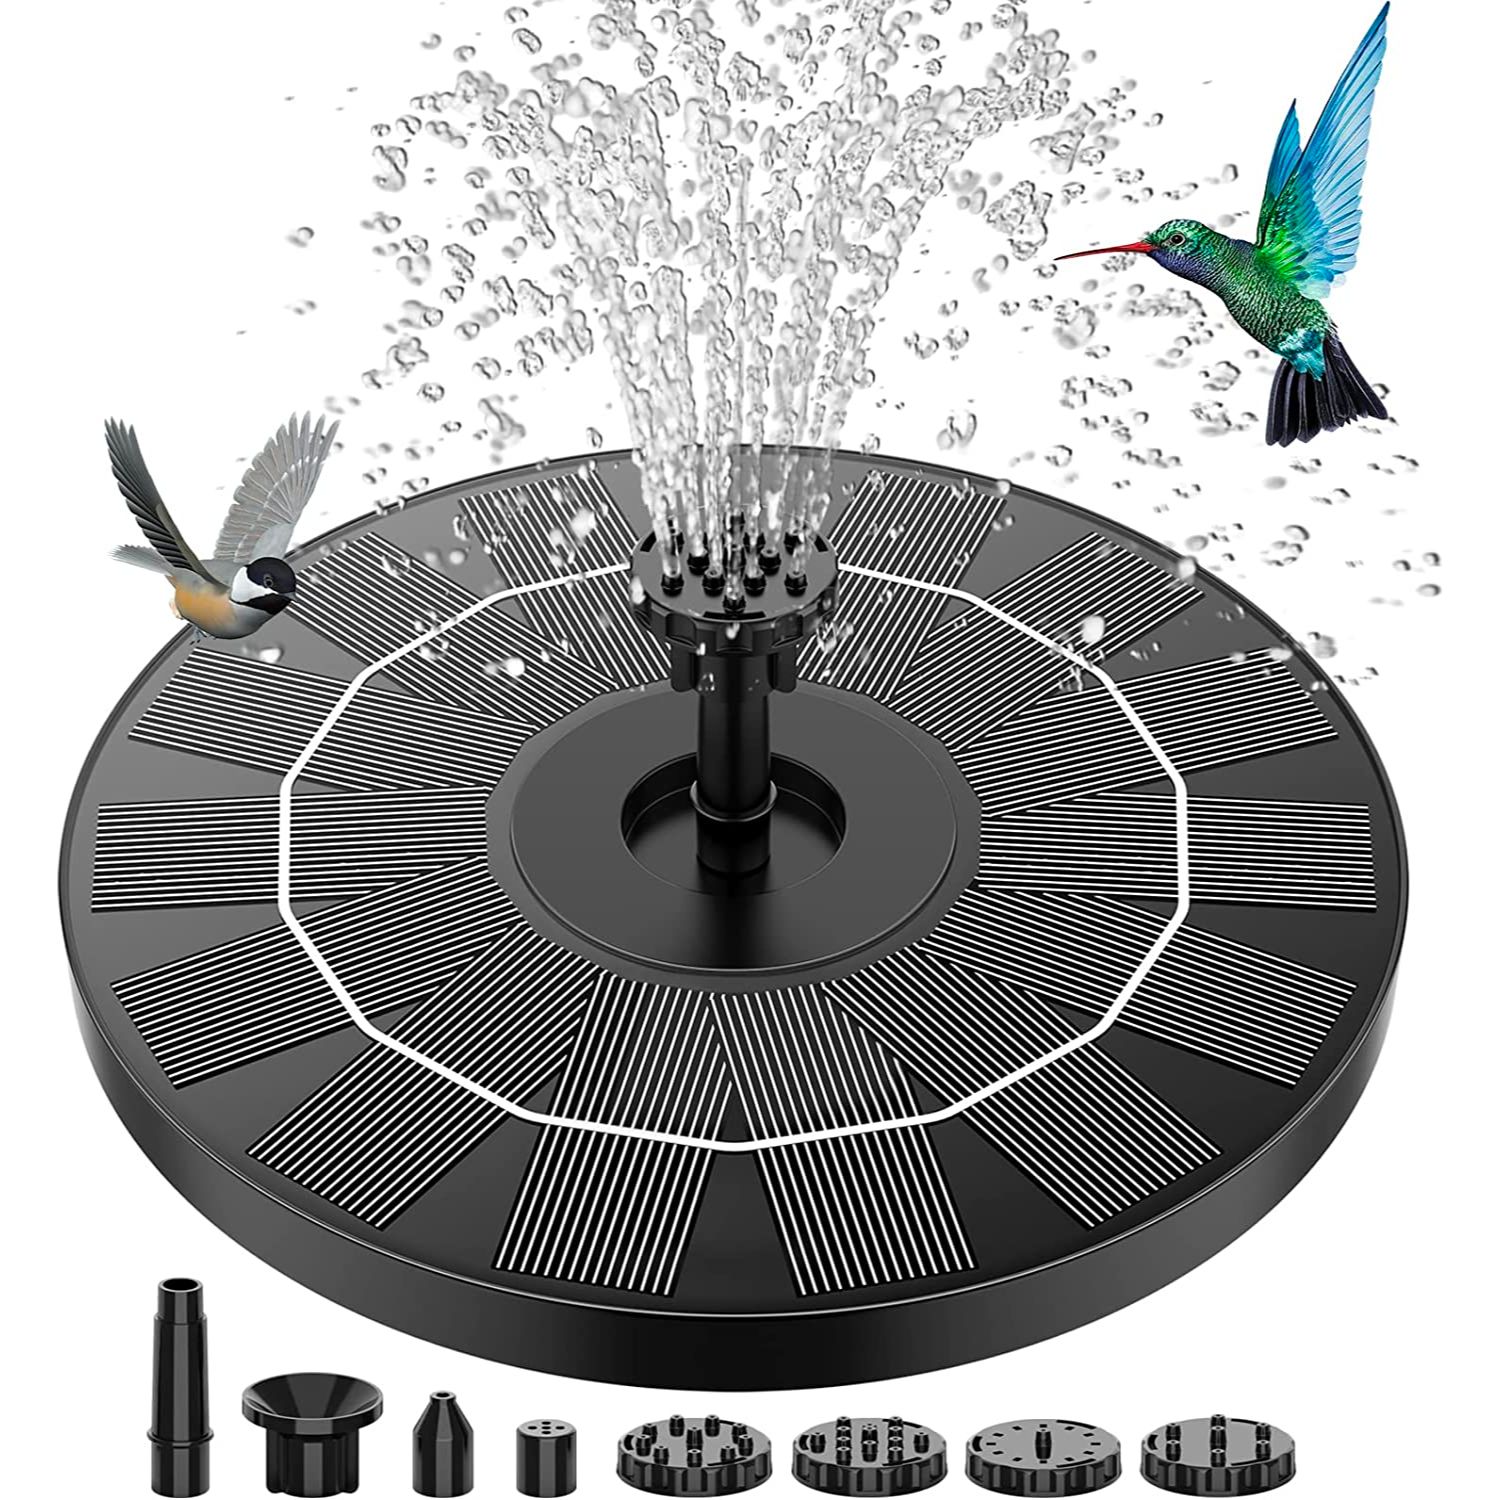 The Best Outdoor Accessories for Bird Lovers Option: Aisitin 3.5W Solar Fountain